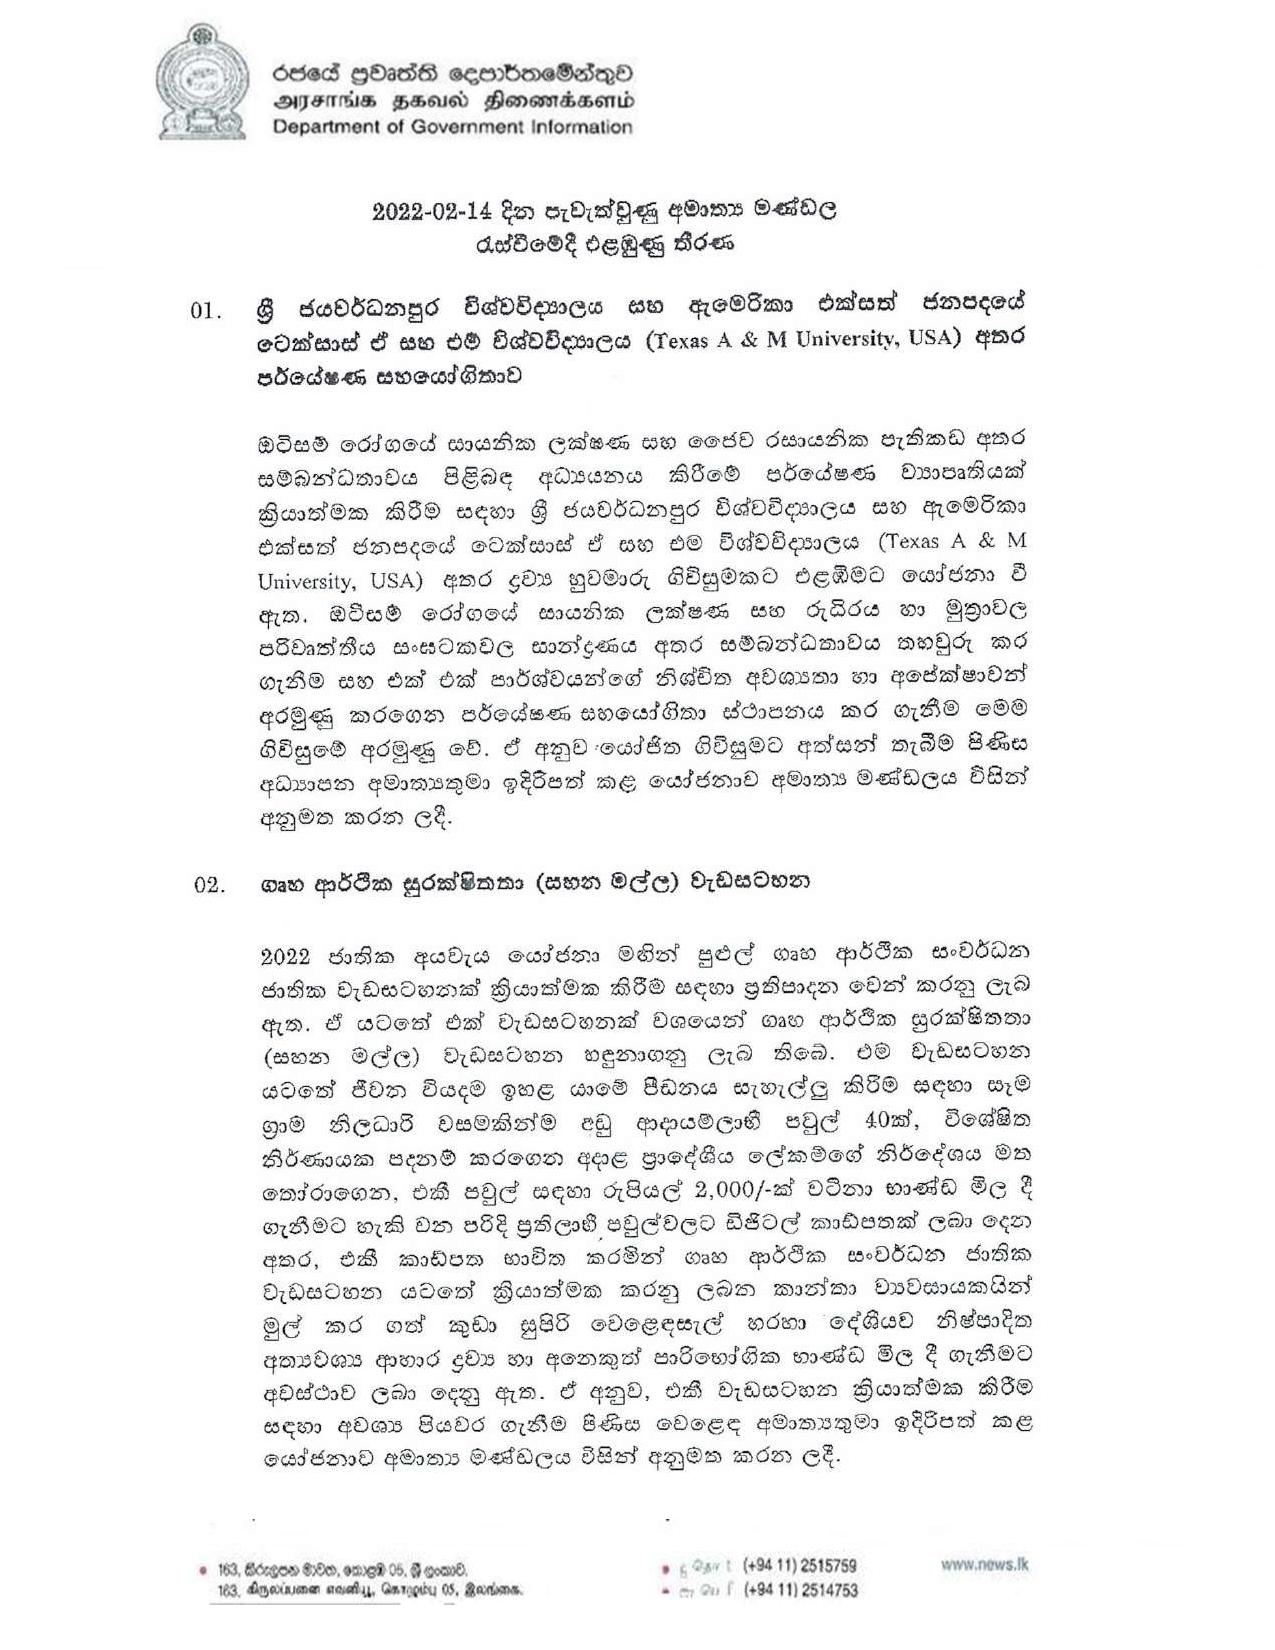 Cabinet Decision on 14.02.2022 page 001